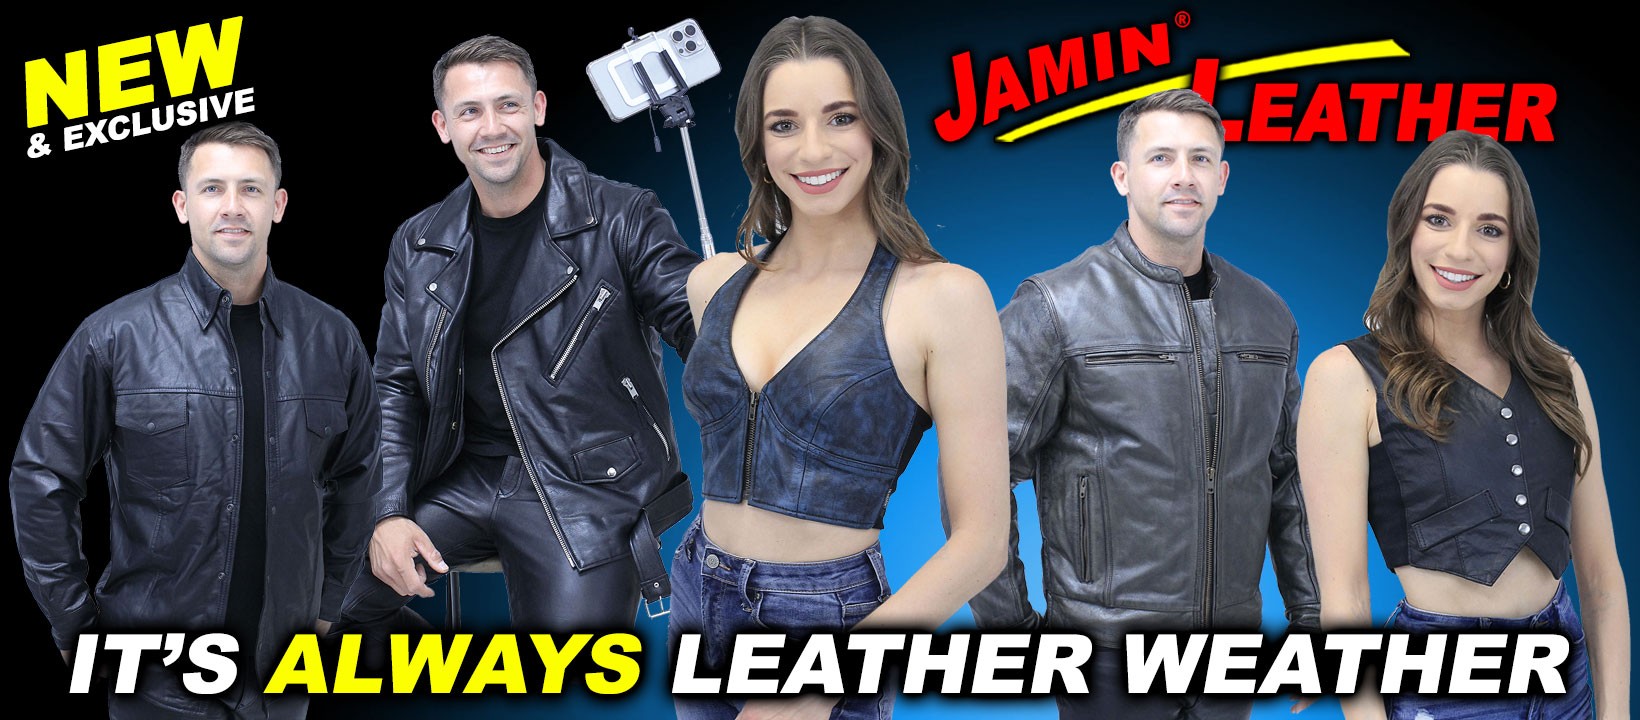 New and Exclusive! It's Always Leather Weather!